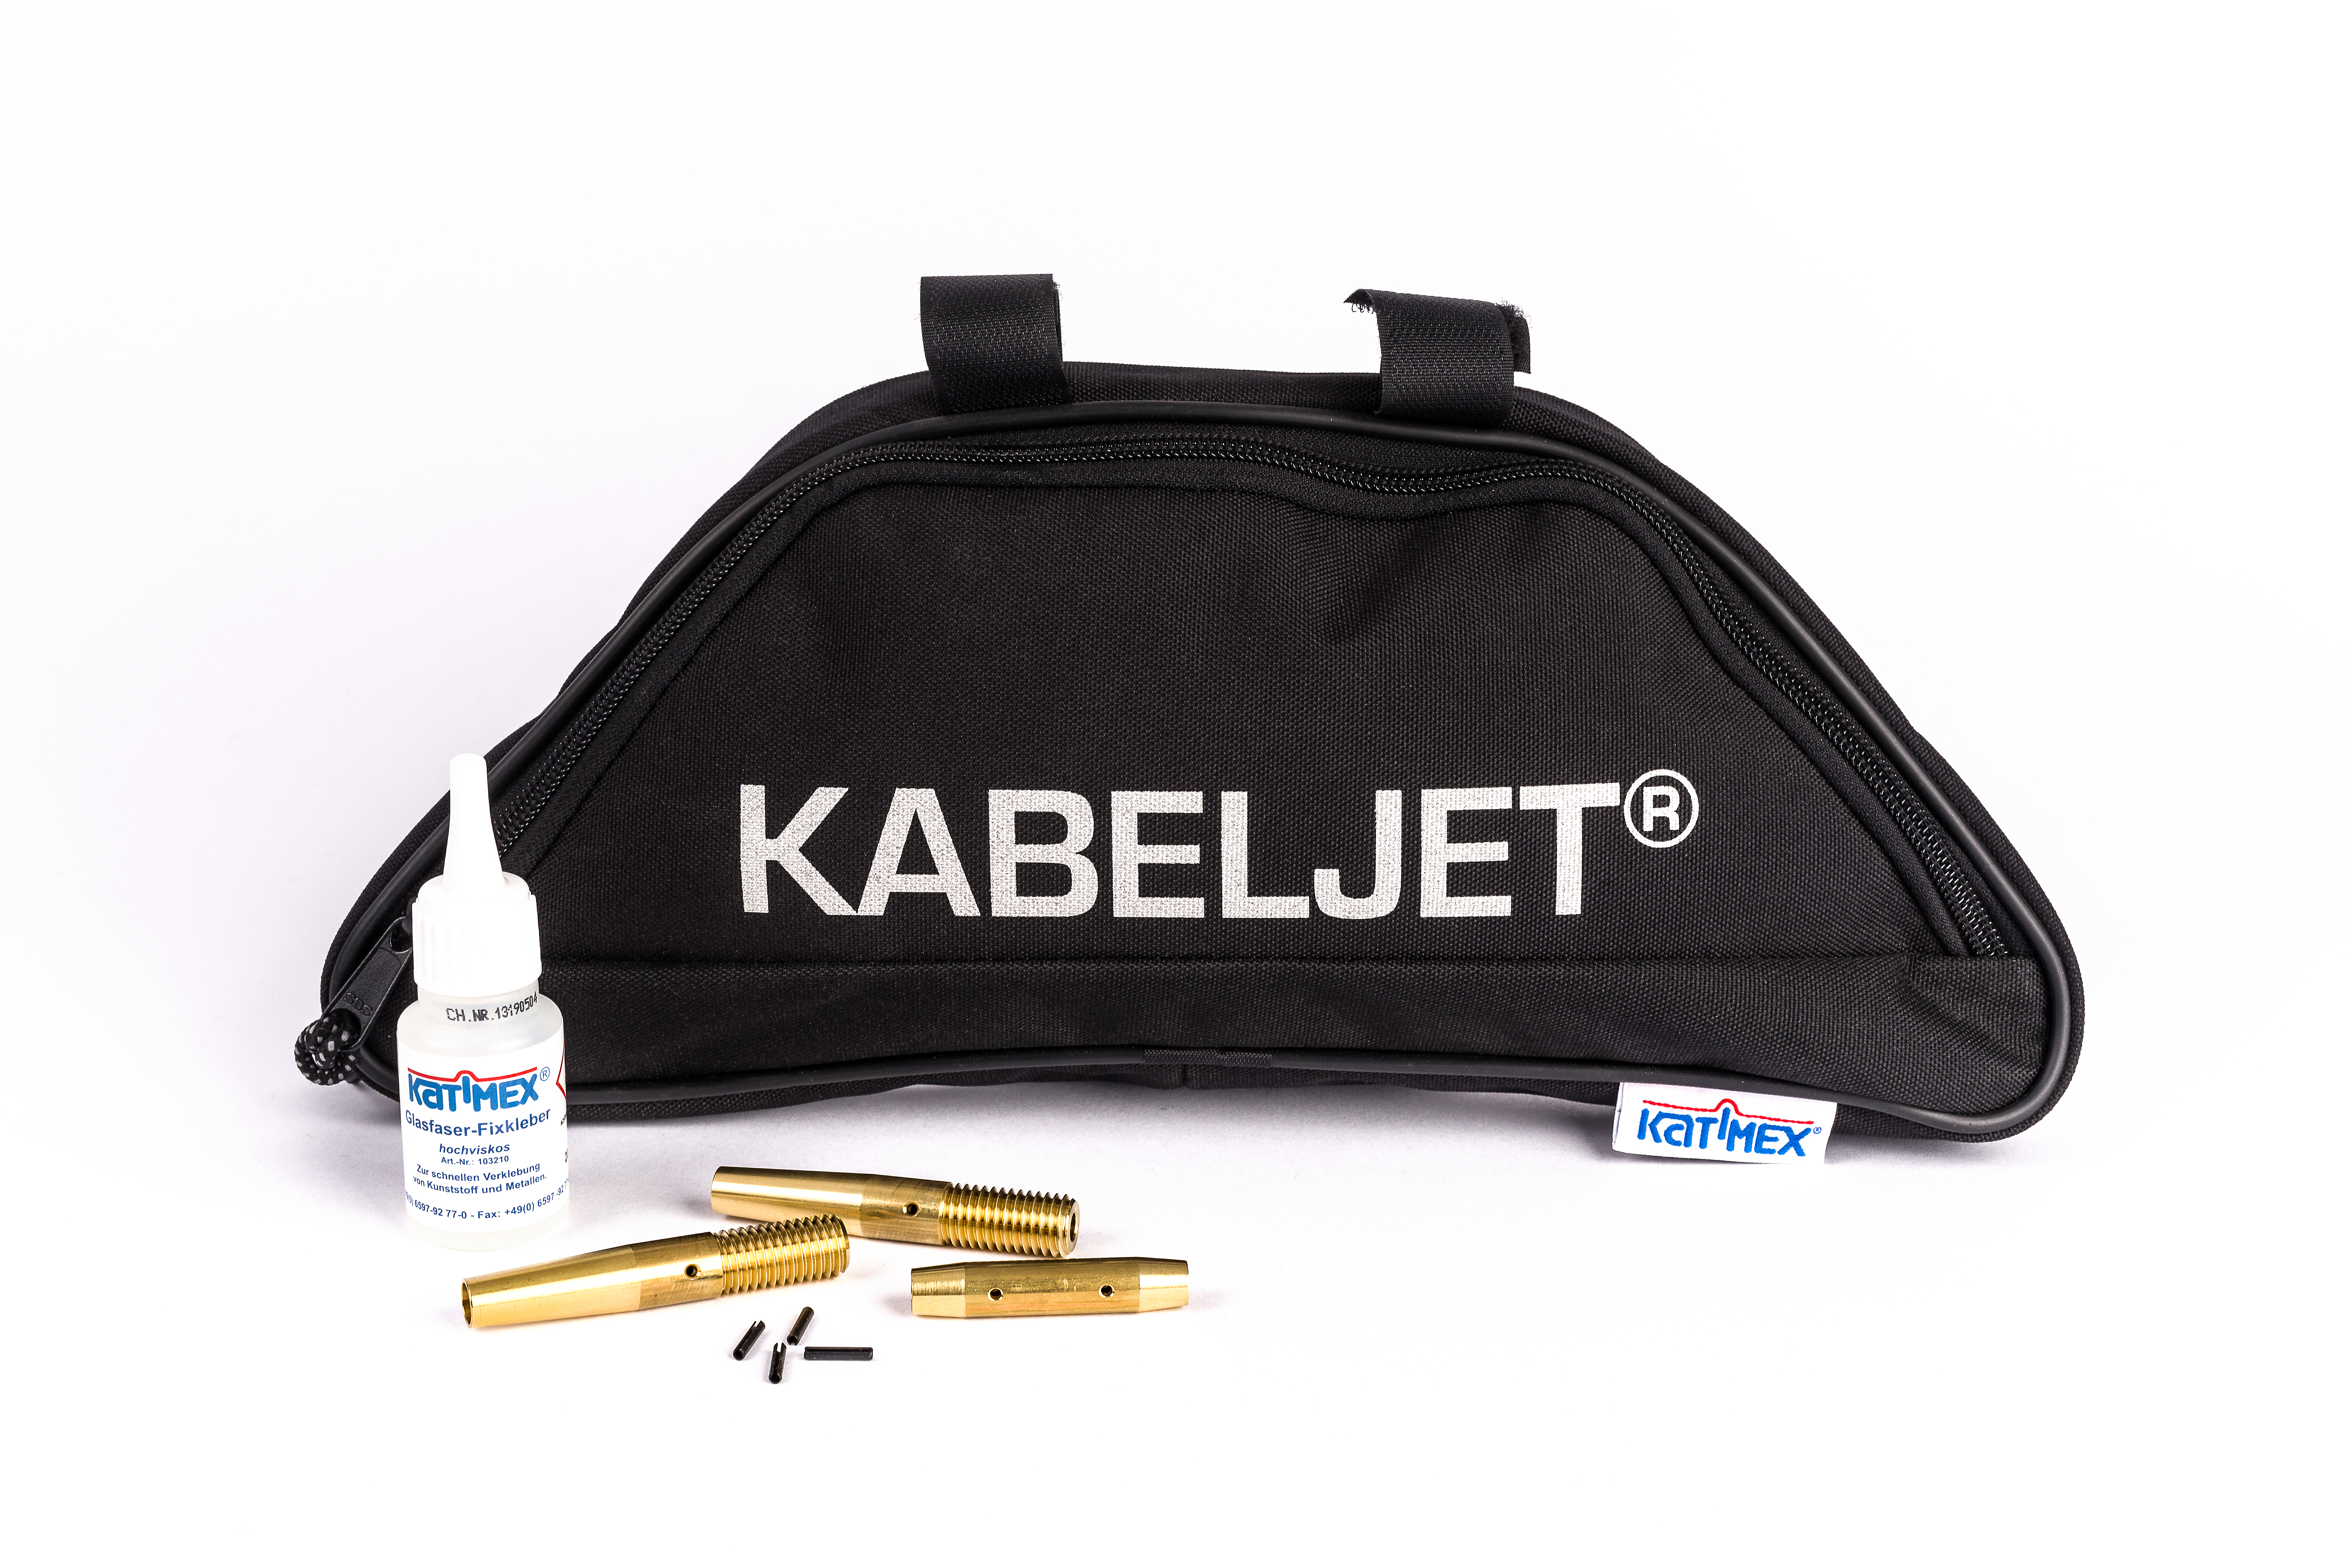 cablejet-service-bag-with-accessiores